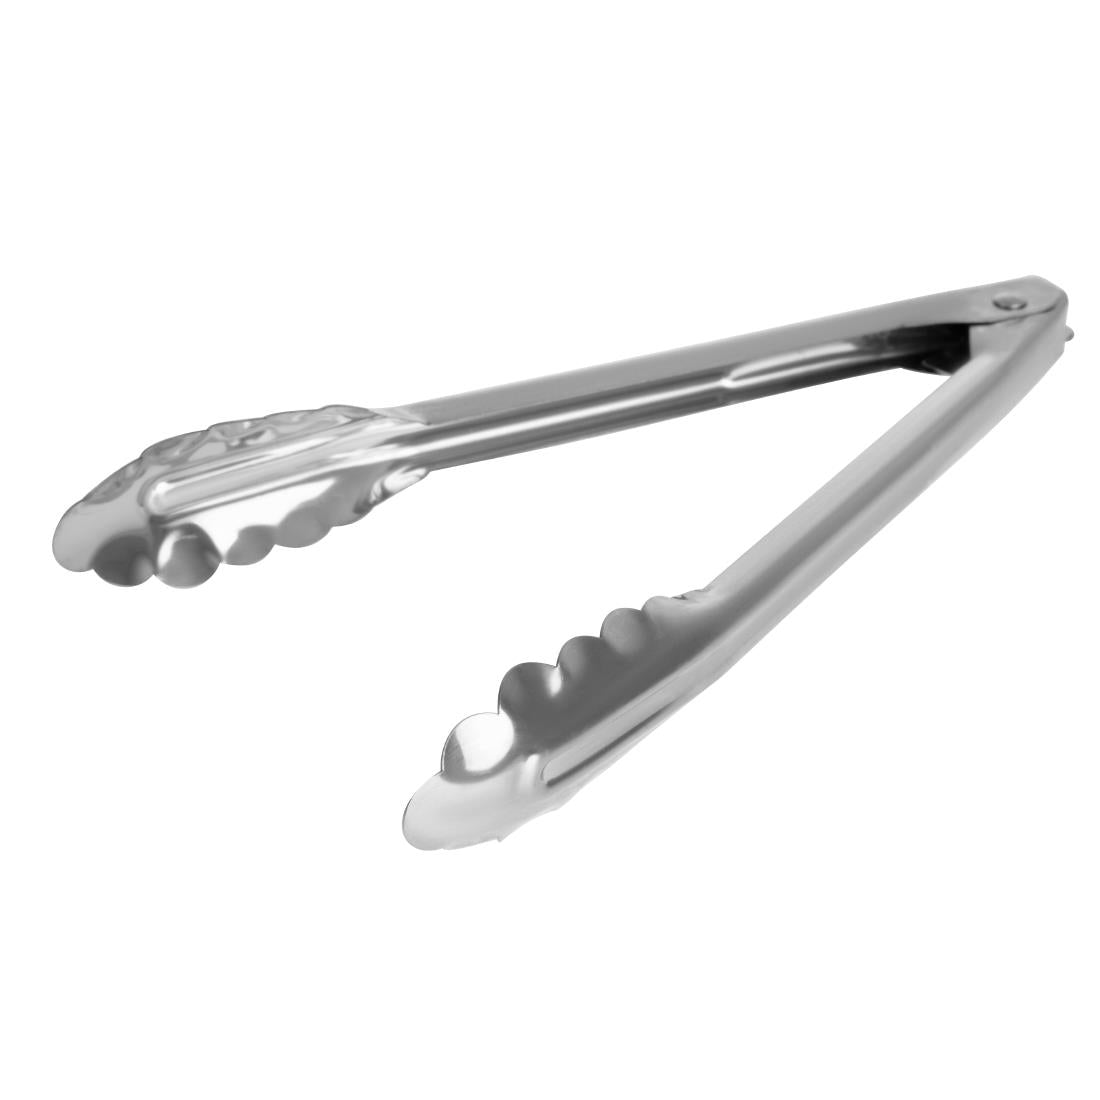 Vogue Catering Tongs 10"